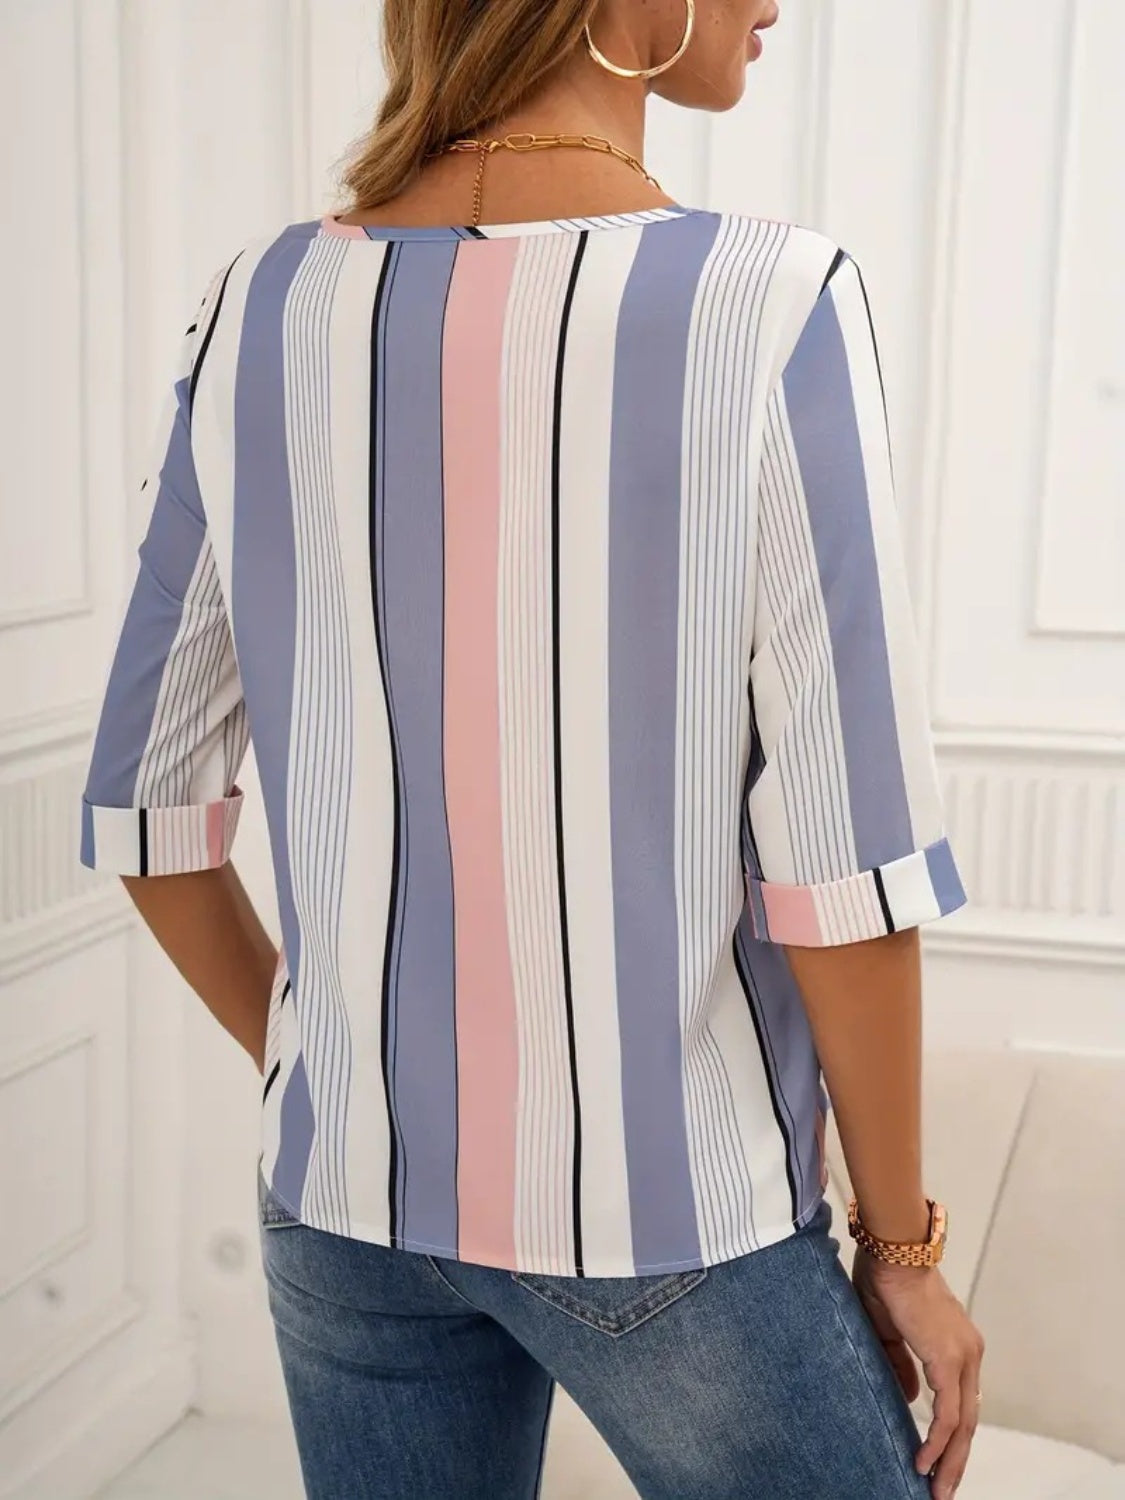 Stylish pastel striped blouse with round neckline and 3/4 sleeves